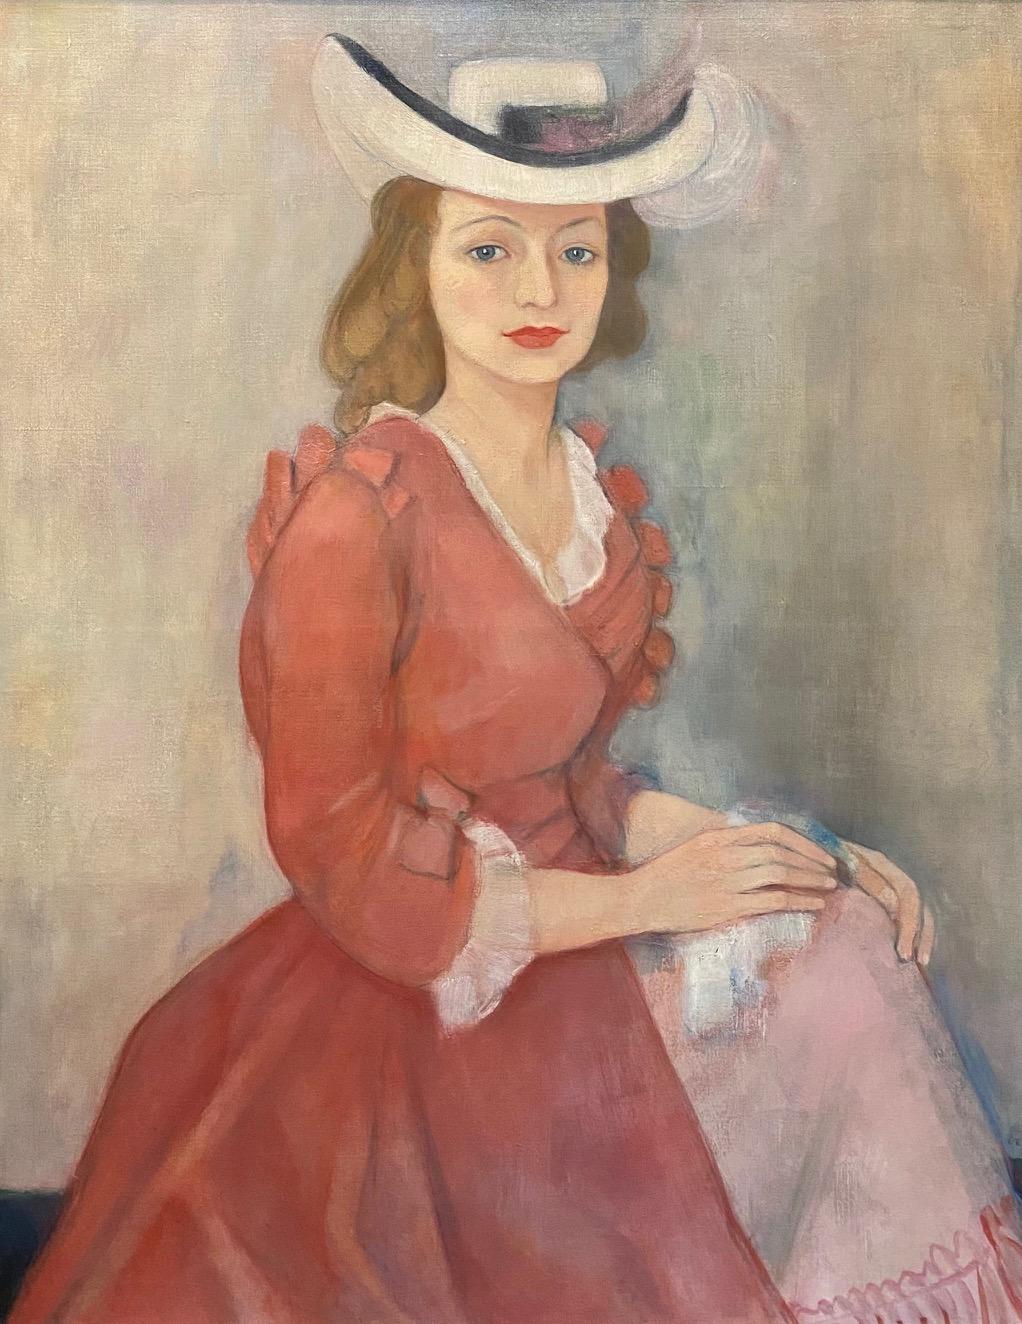 Oil on canvas with wooden frame. Total size with frame is 88x109 cm 
Ilse VOIGT is an artist born in 1905 and died in 1997. His works have been sold at public auction 24 times, mostly in the Print-Multiple category